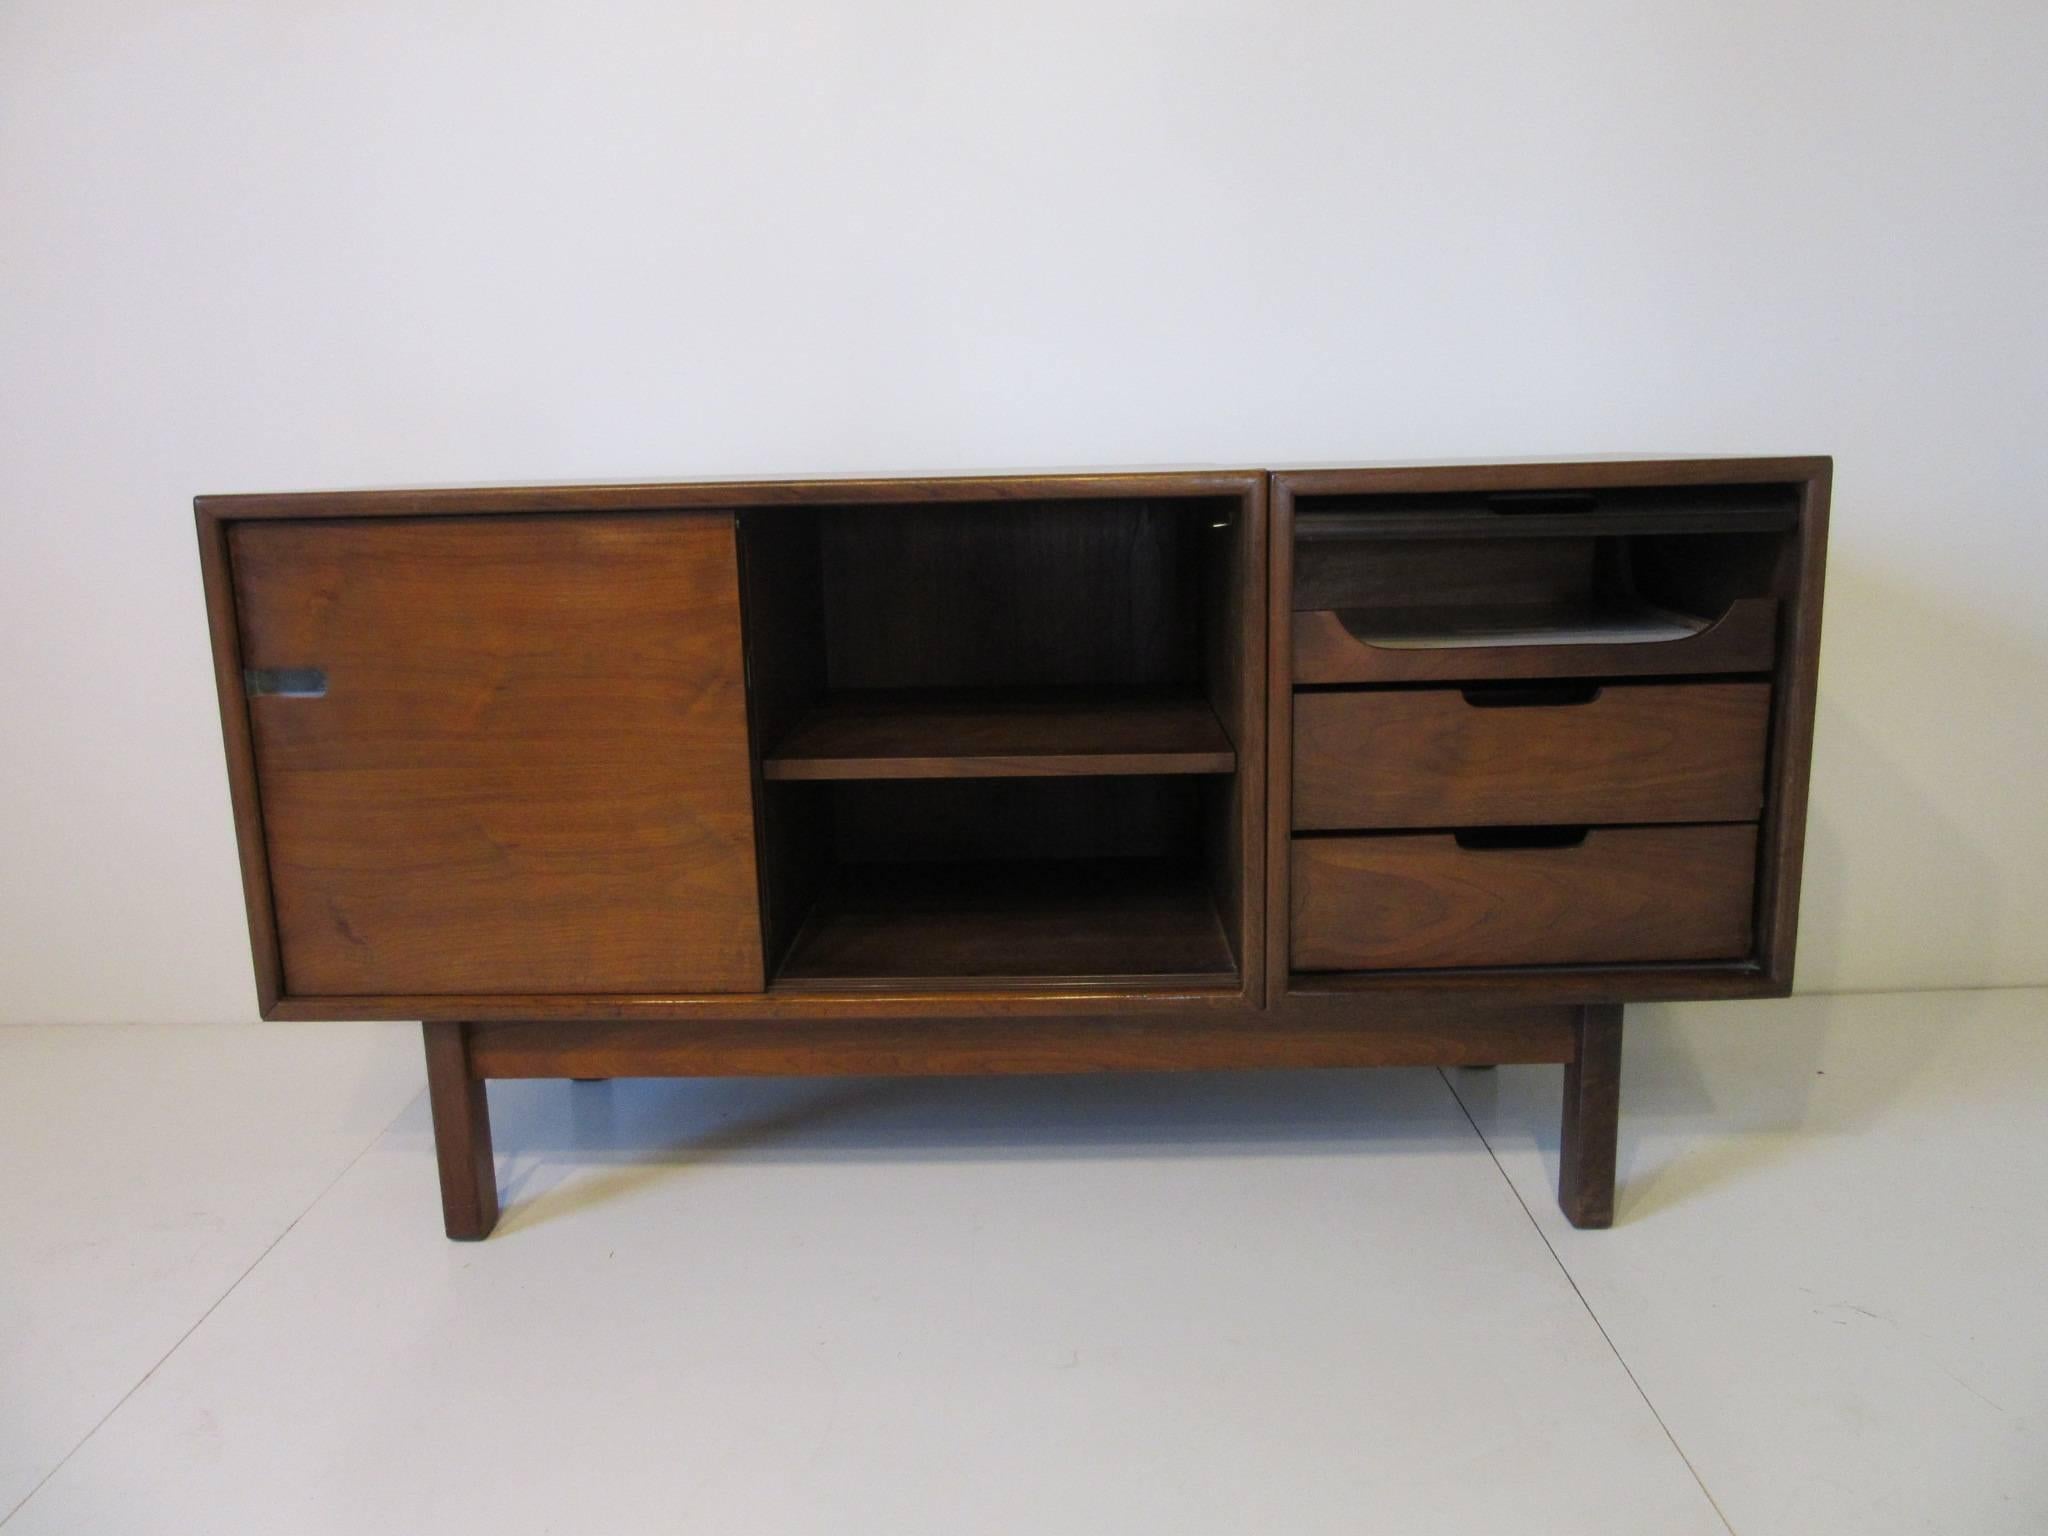 20th Century Dark Walnut Credenza with Tambour Pull Up Door in the Style of Stow Davis